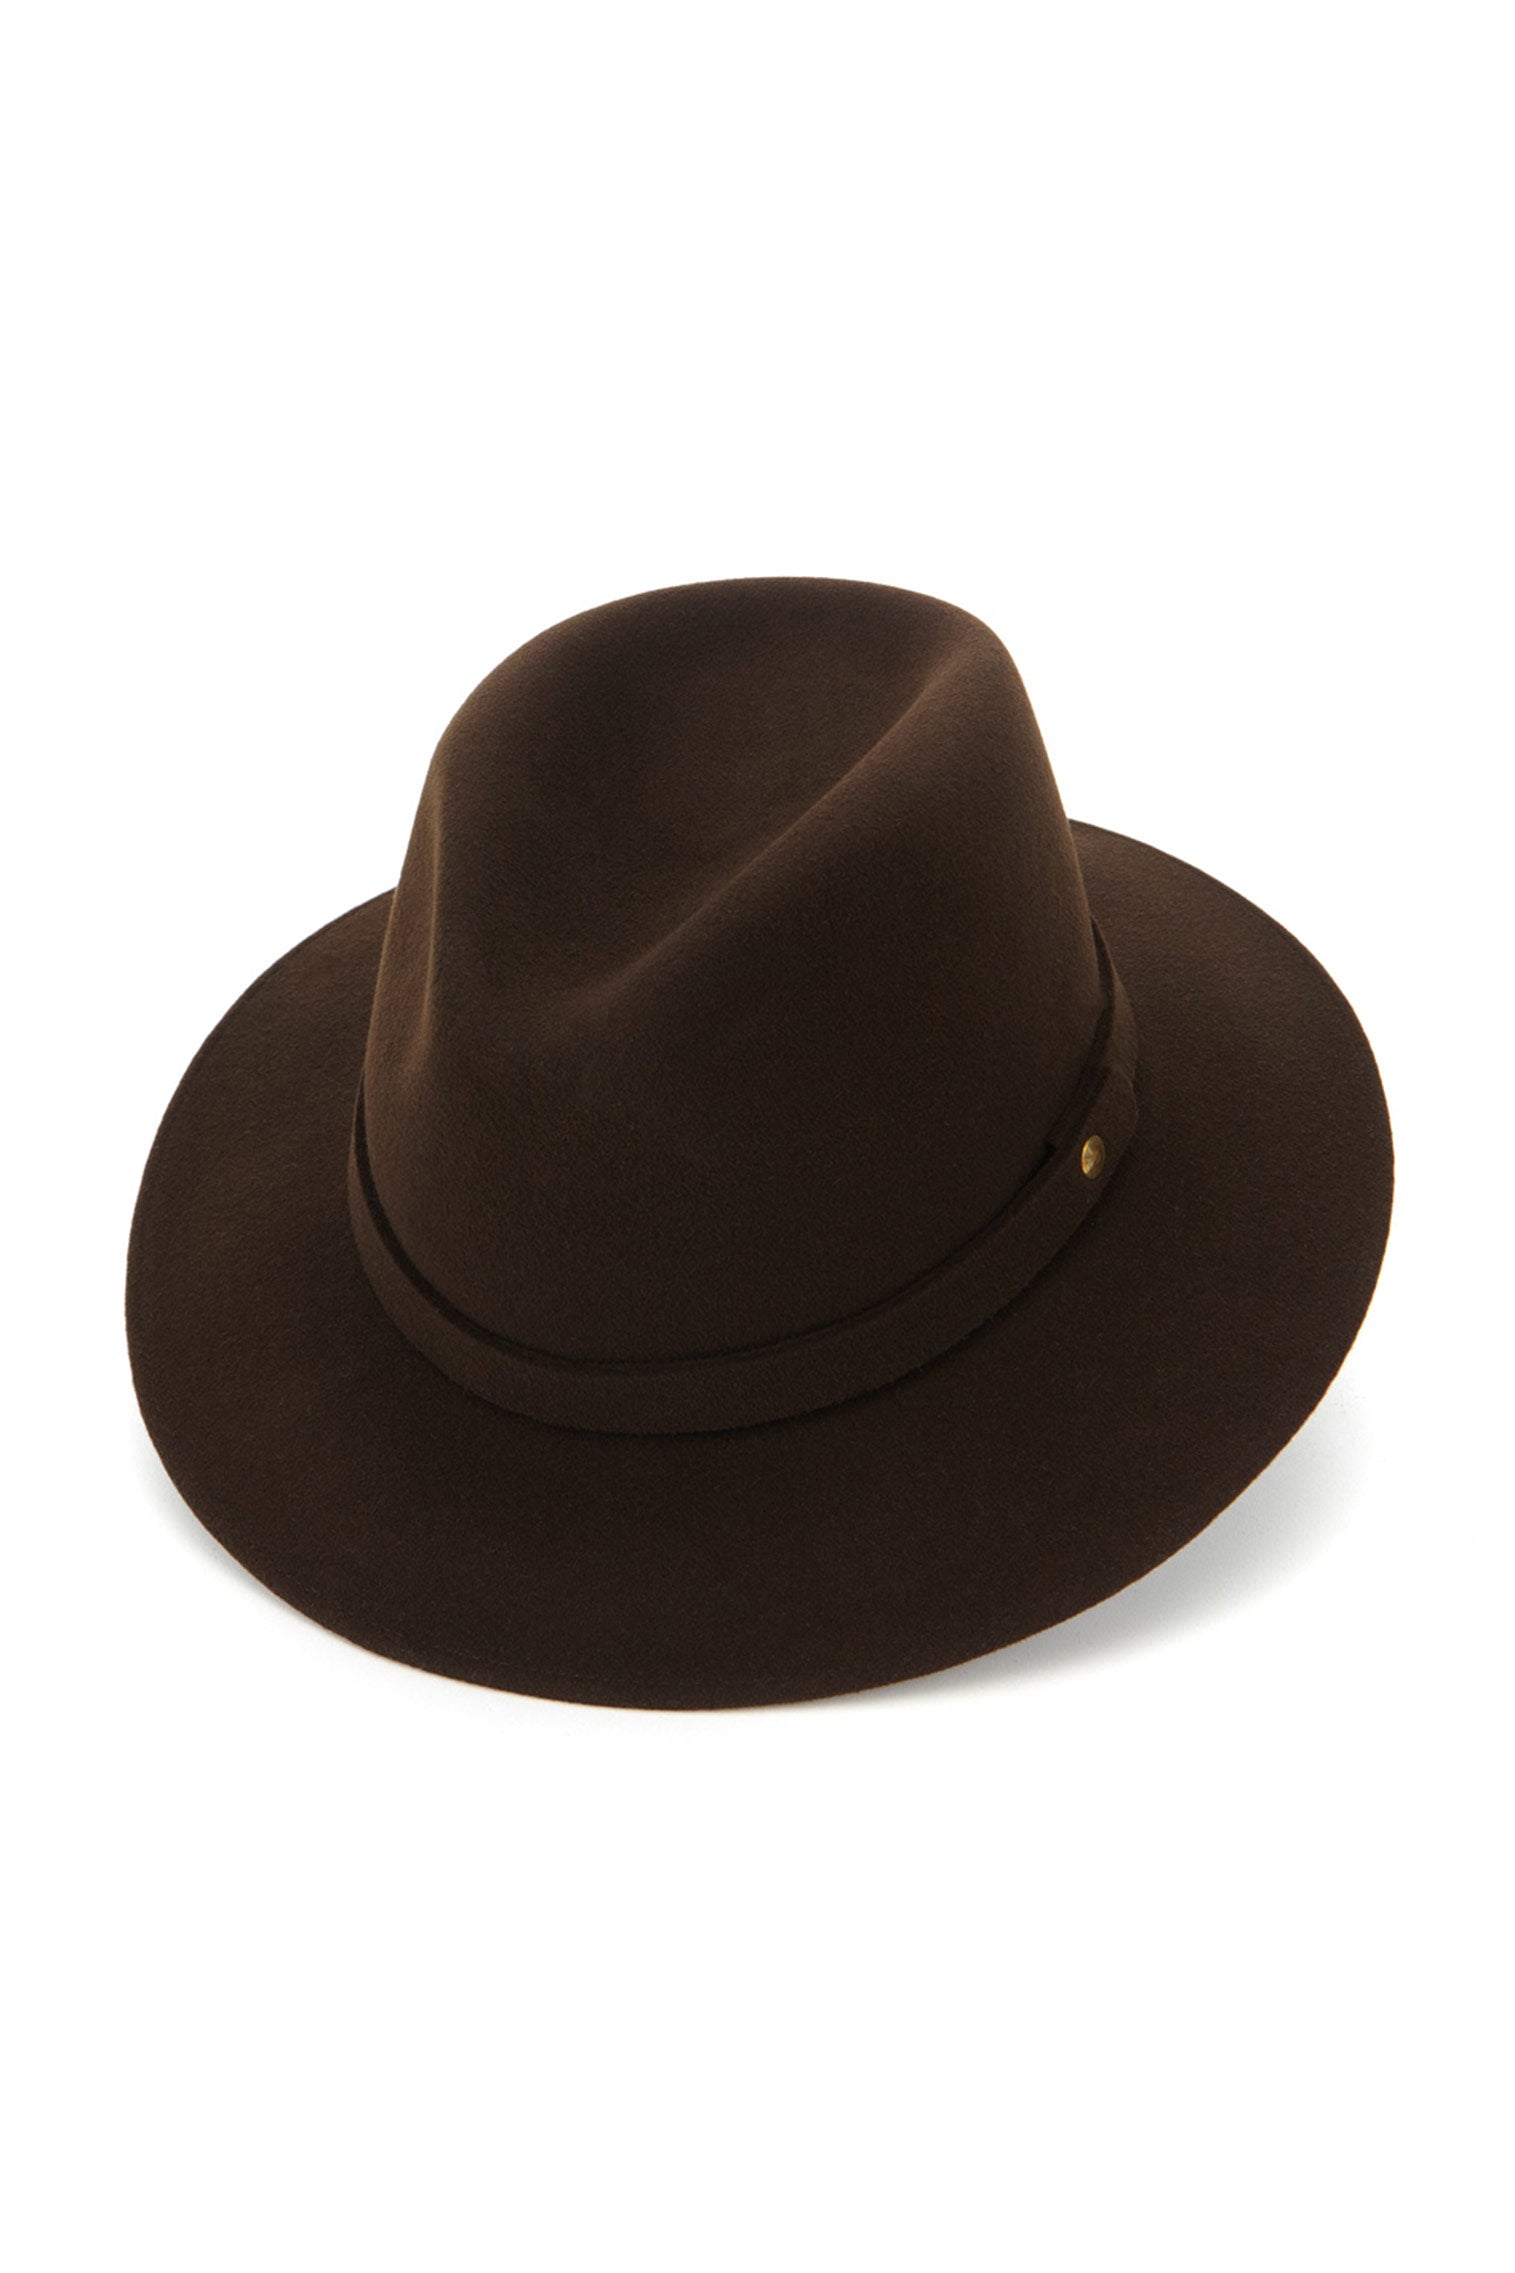 Nomad Rollable Trilby - Cheltenham Collection - Lock & Co. Hatters London UK